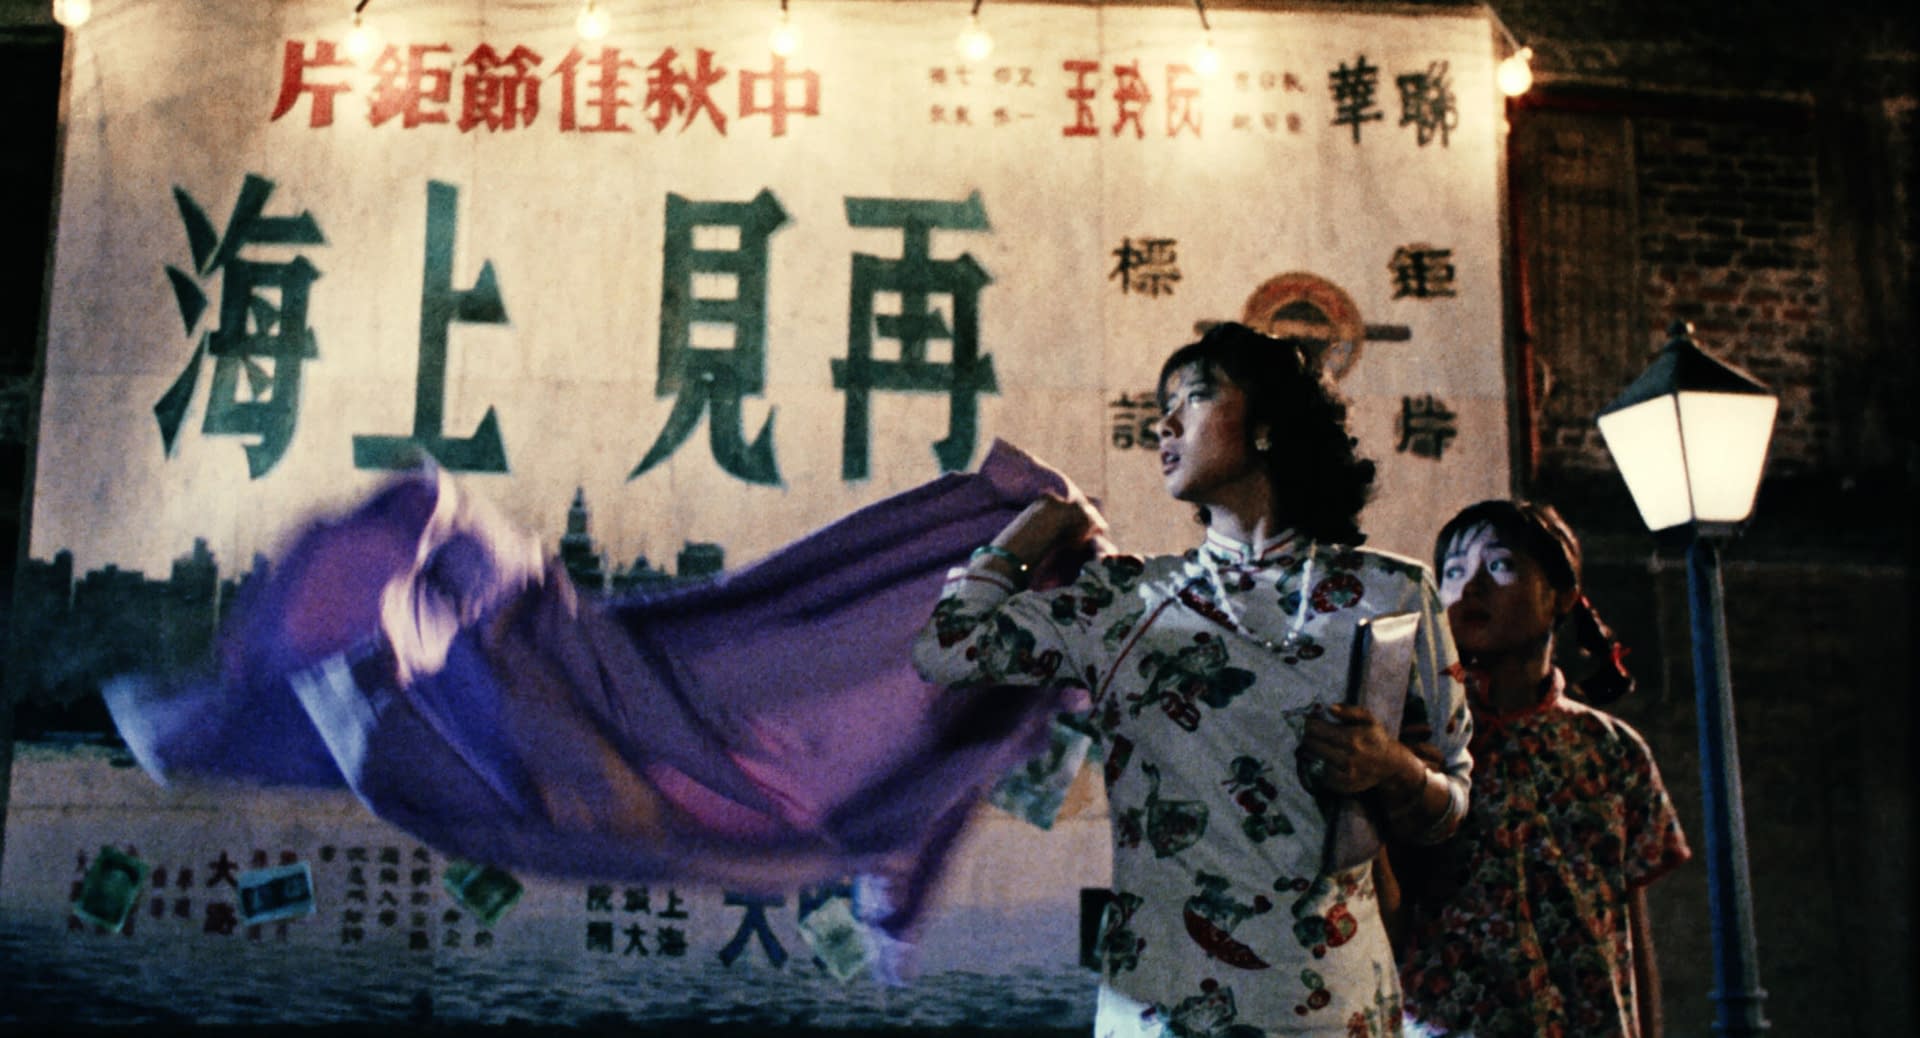 Shanghai Blues: Tsui Hark's Restored 1984 Comedy to Screen at Cannes